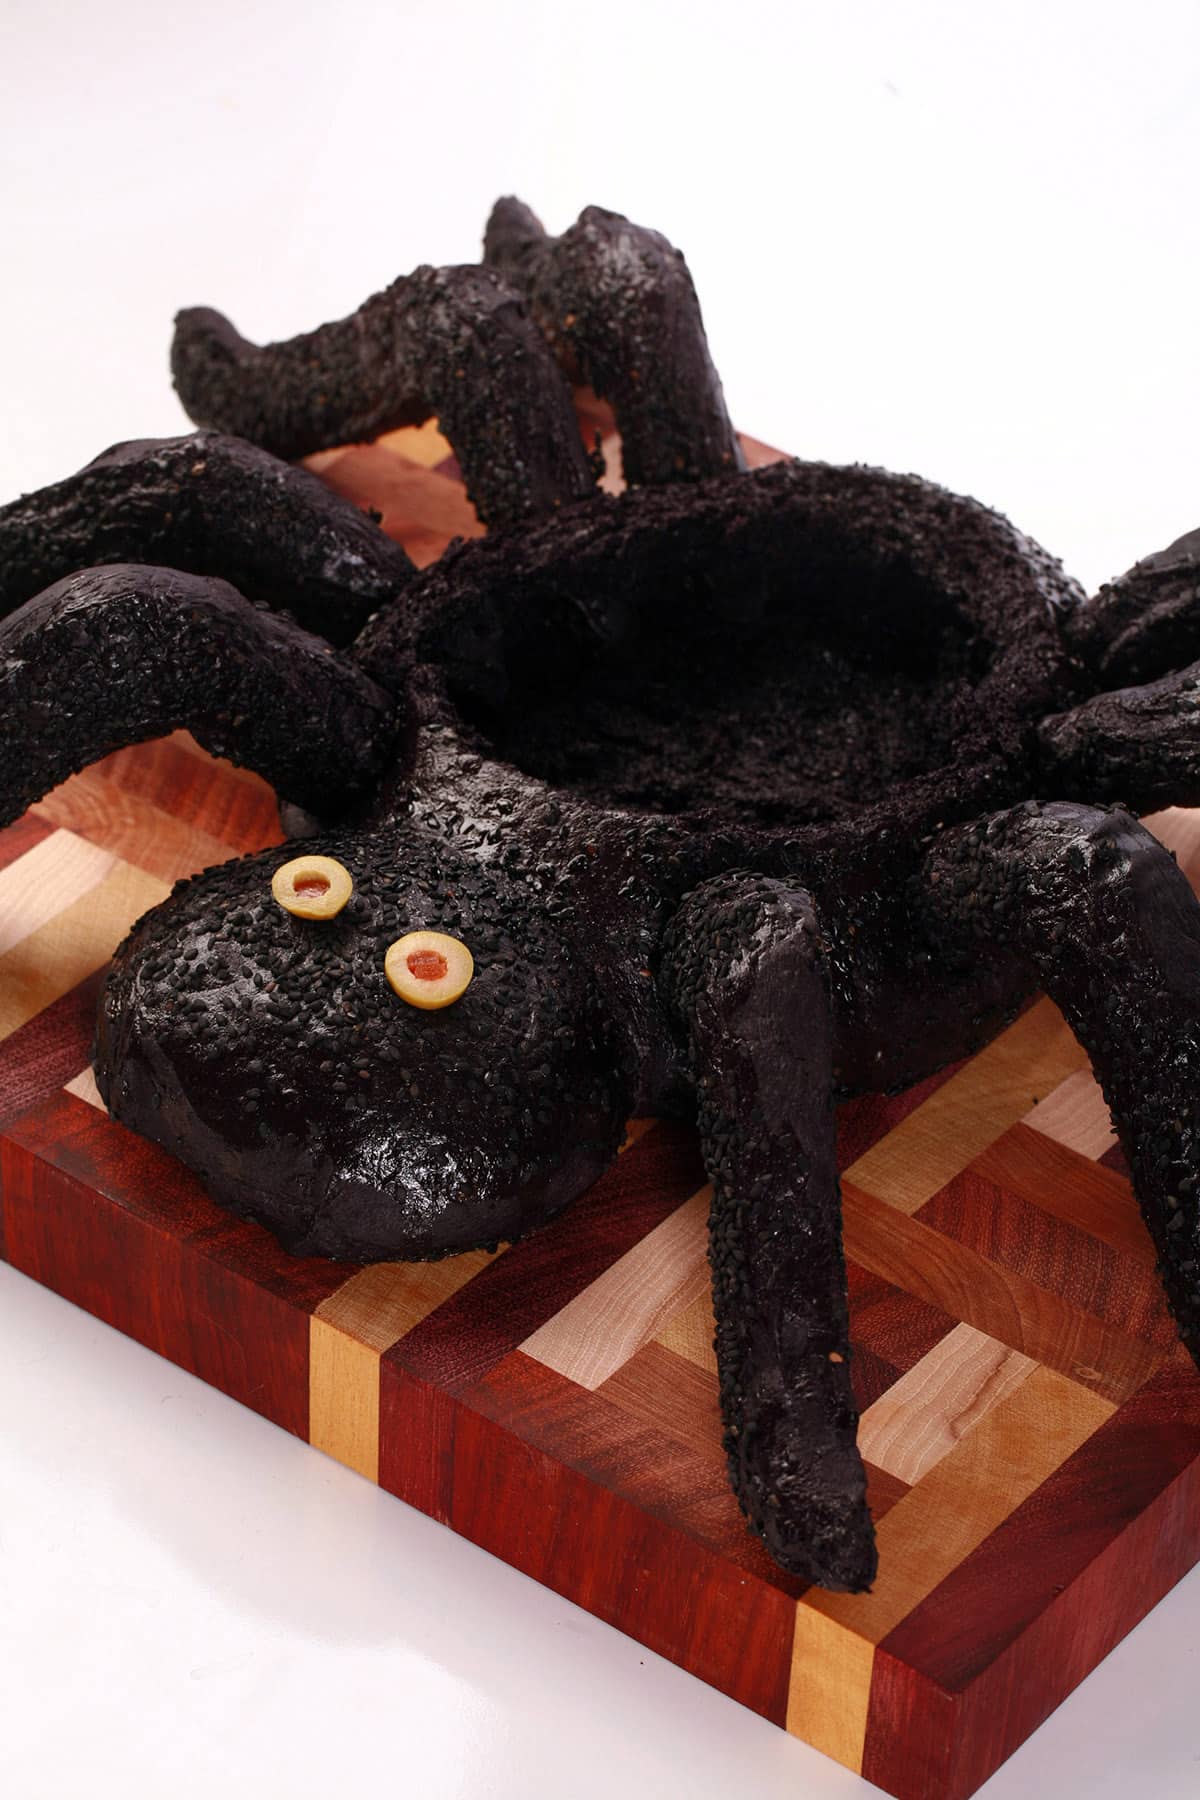 A black spider bread bowl on a wooden cutting board.